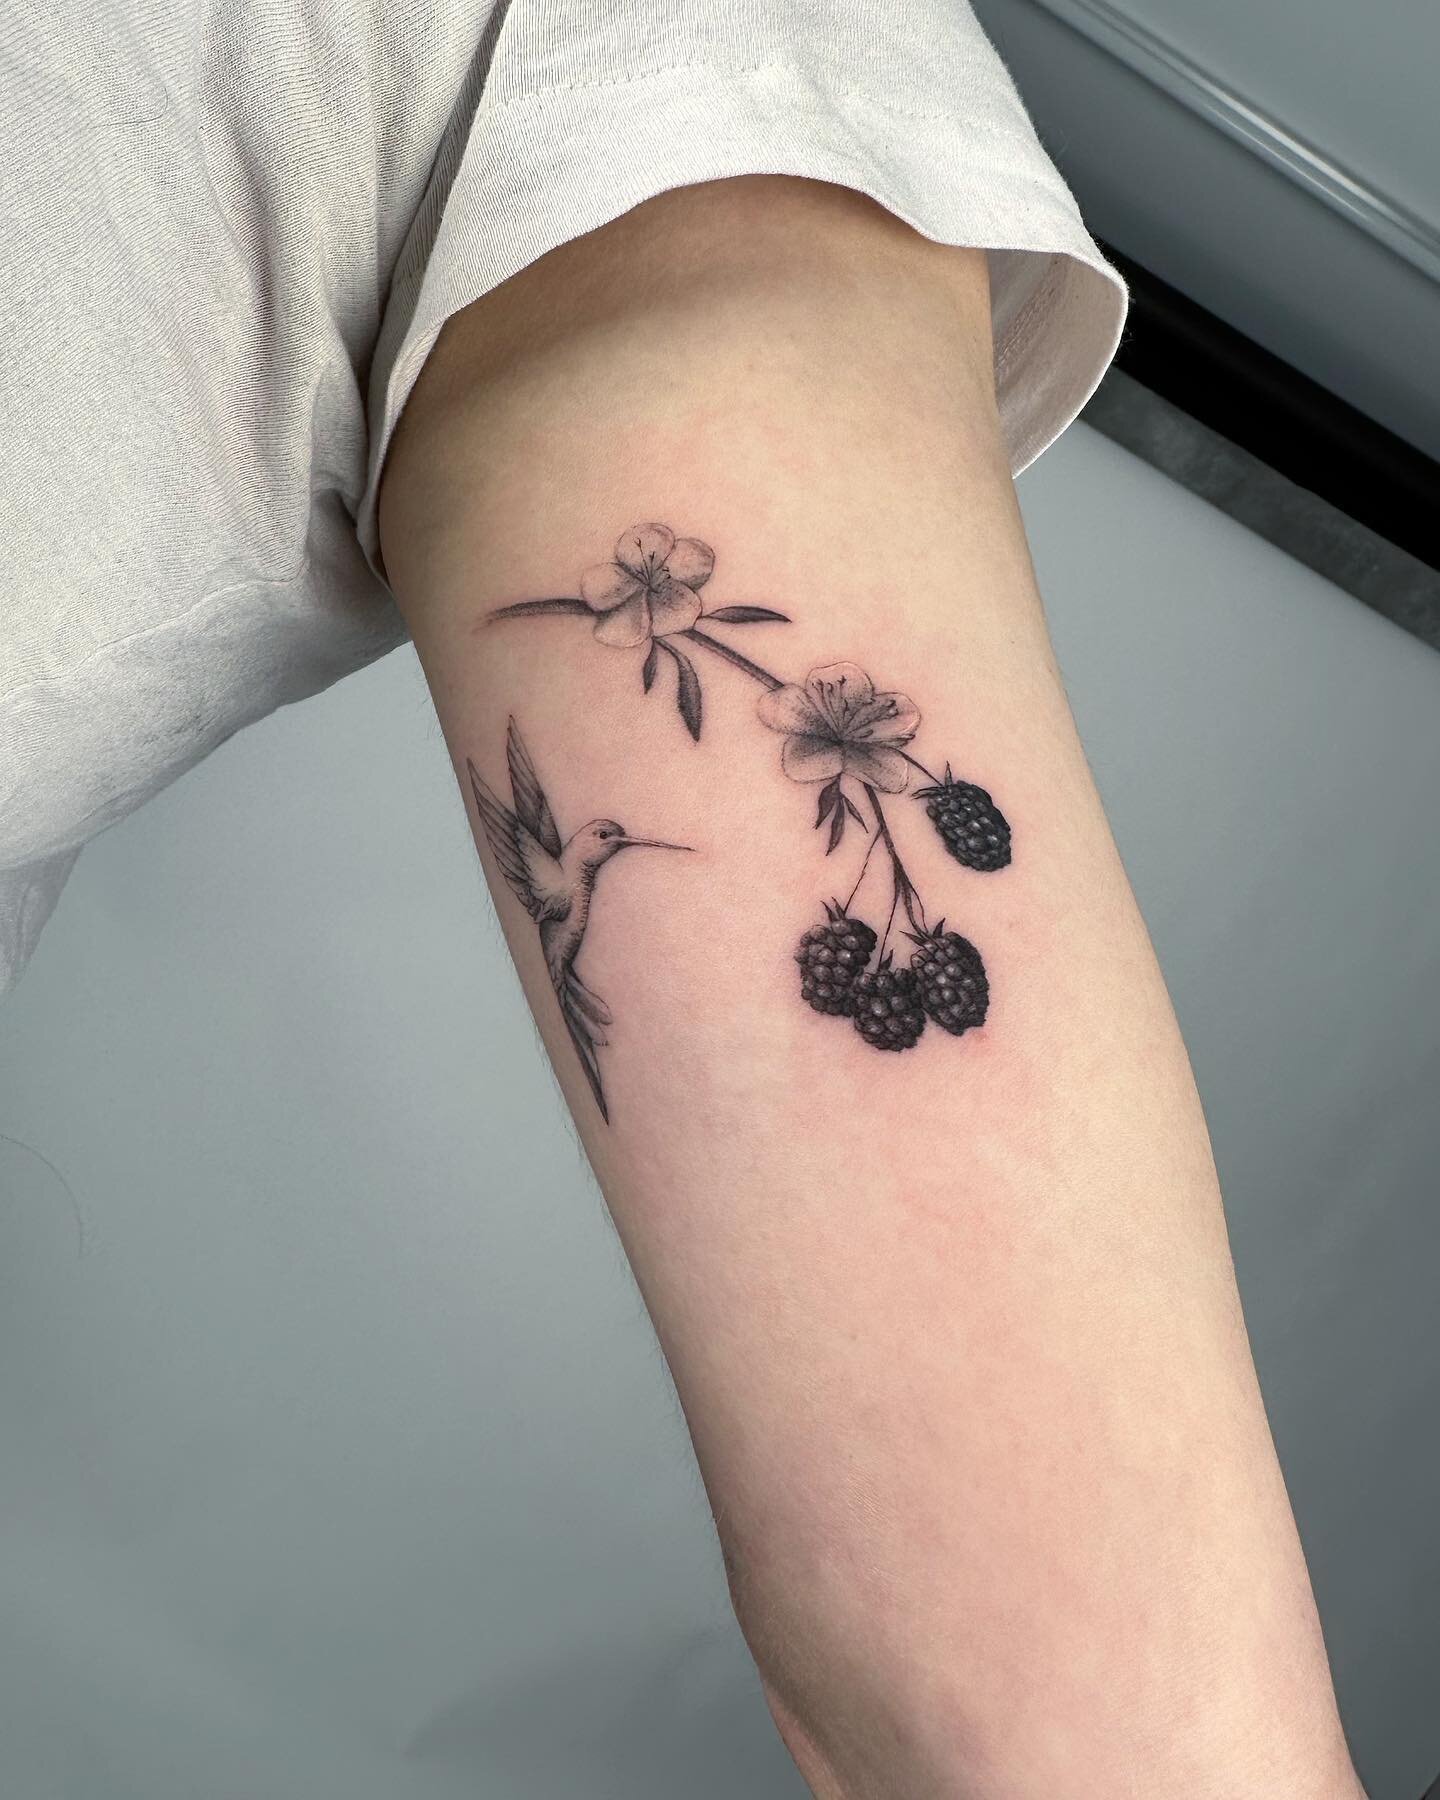 Blackberry branch and hummingbird by @hiraeth.tattoo 🖤
.
Follow @hiraeth.tattoo to see more work and available designs!

#inkandwatertattoo #inkandwaternyc #nyctattoo #nycartist #fineline #finelinetattoo #microrealism #microrealismotattoo #floraltat